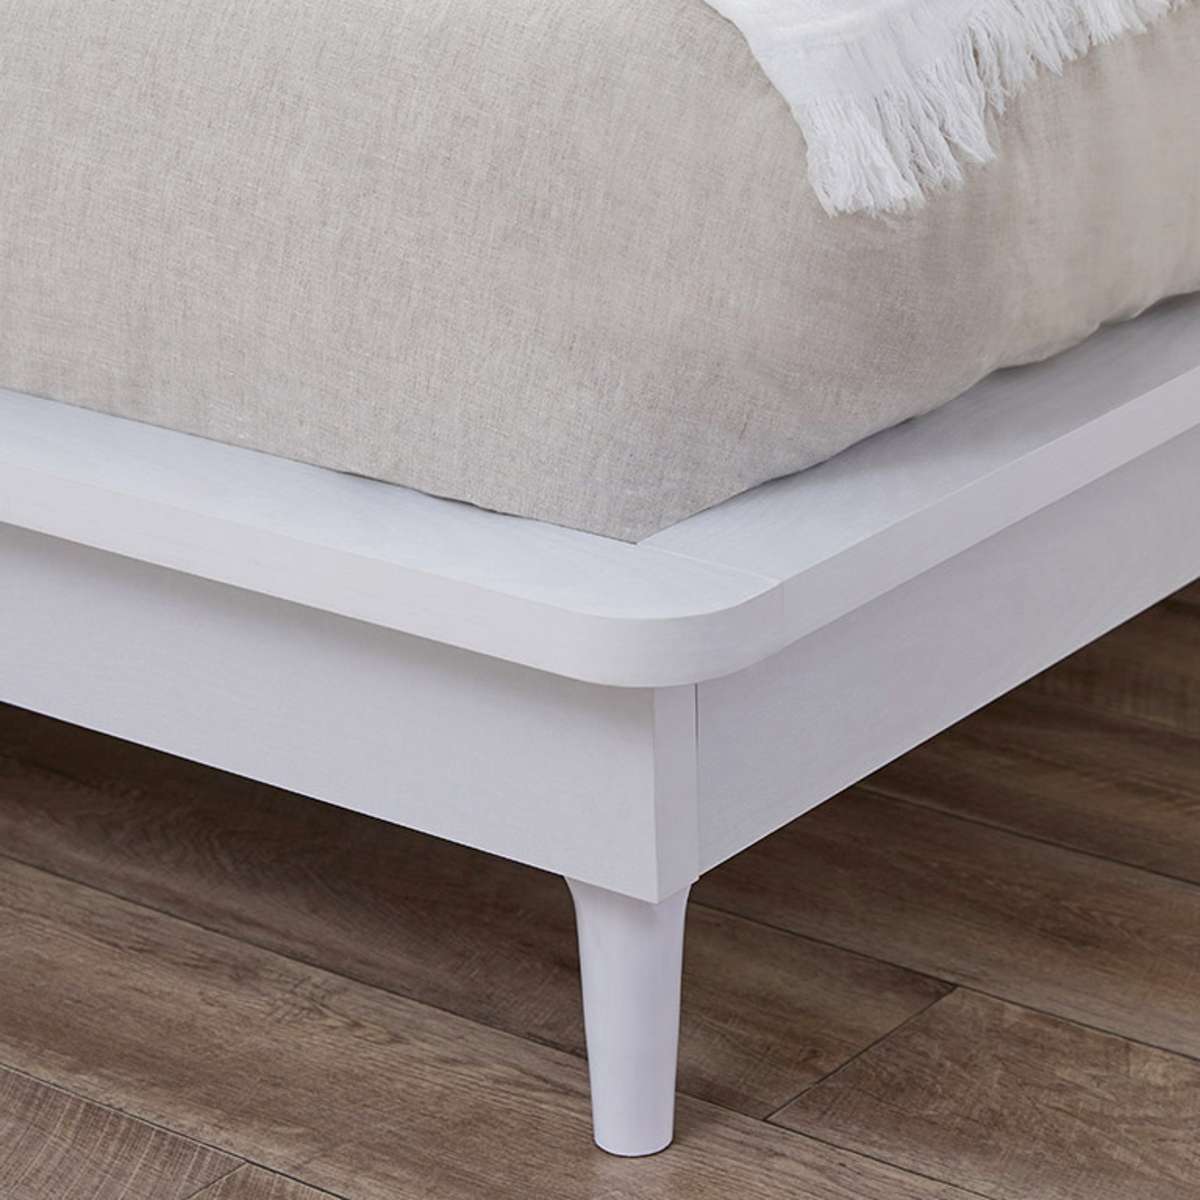 Carson Queen Bed - White